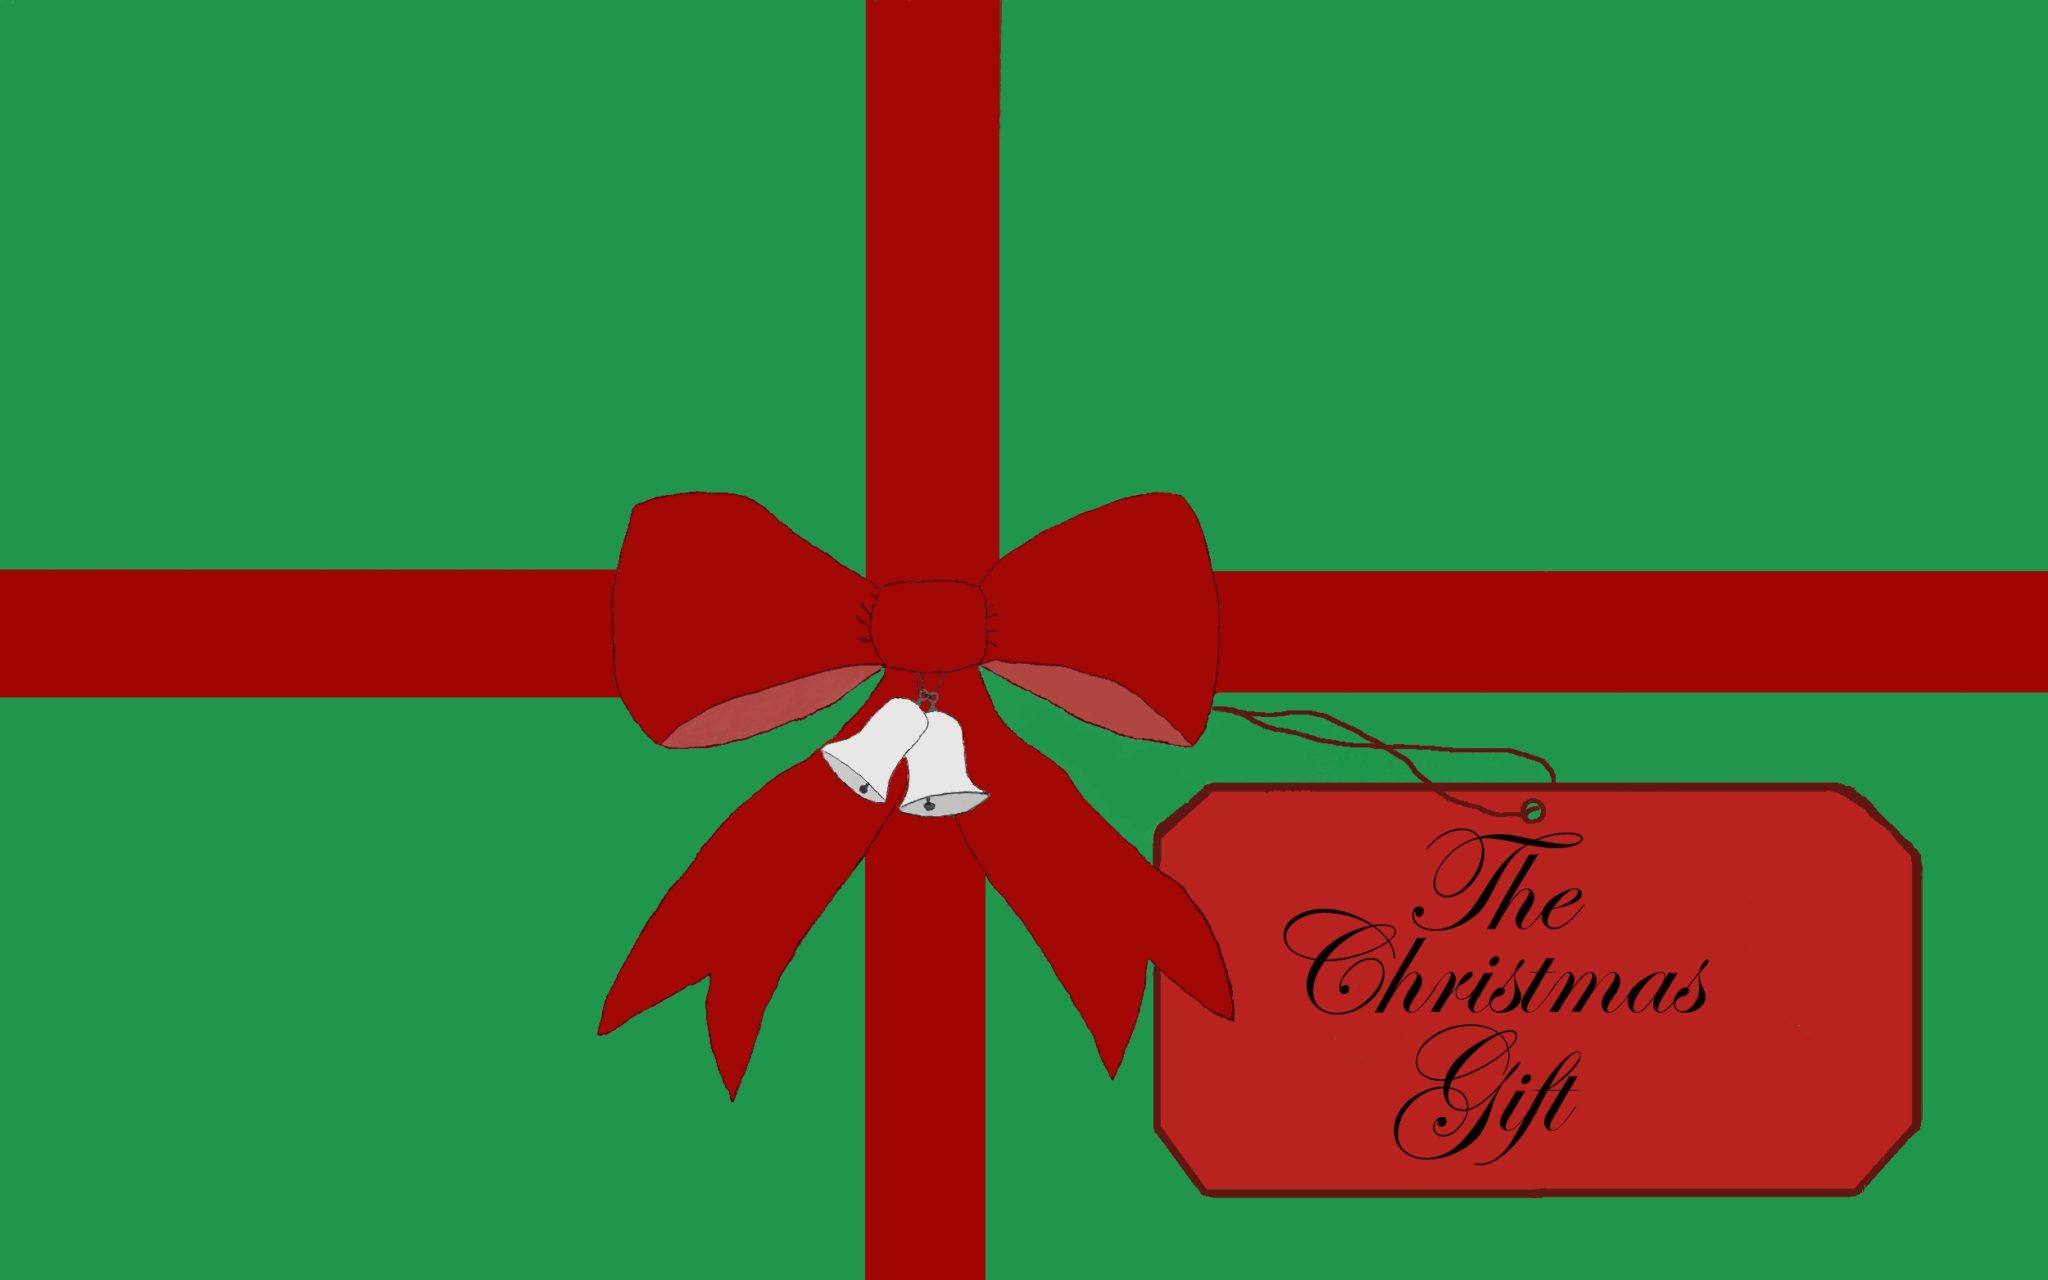 FREE: The Christmas GIft by J. Dietrich